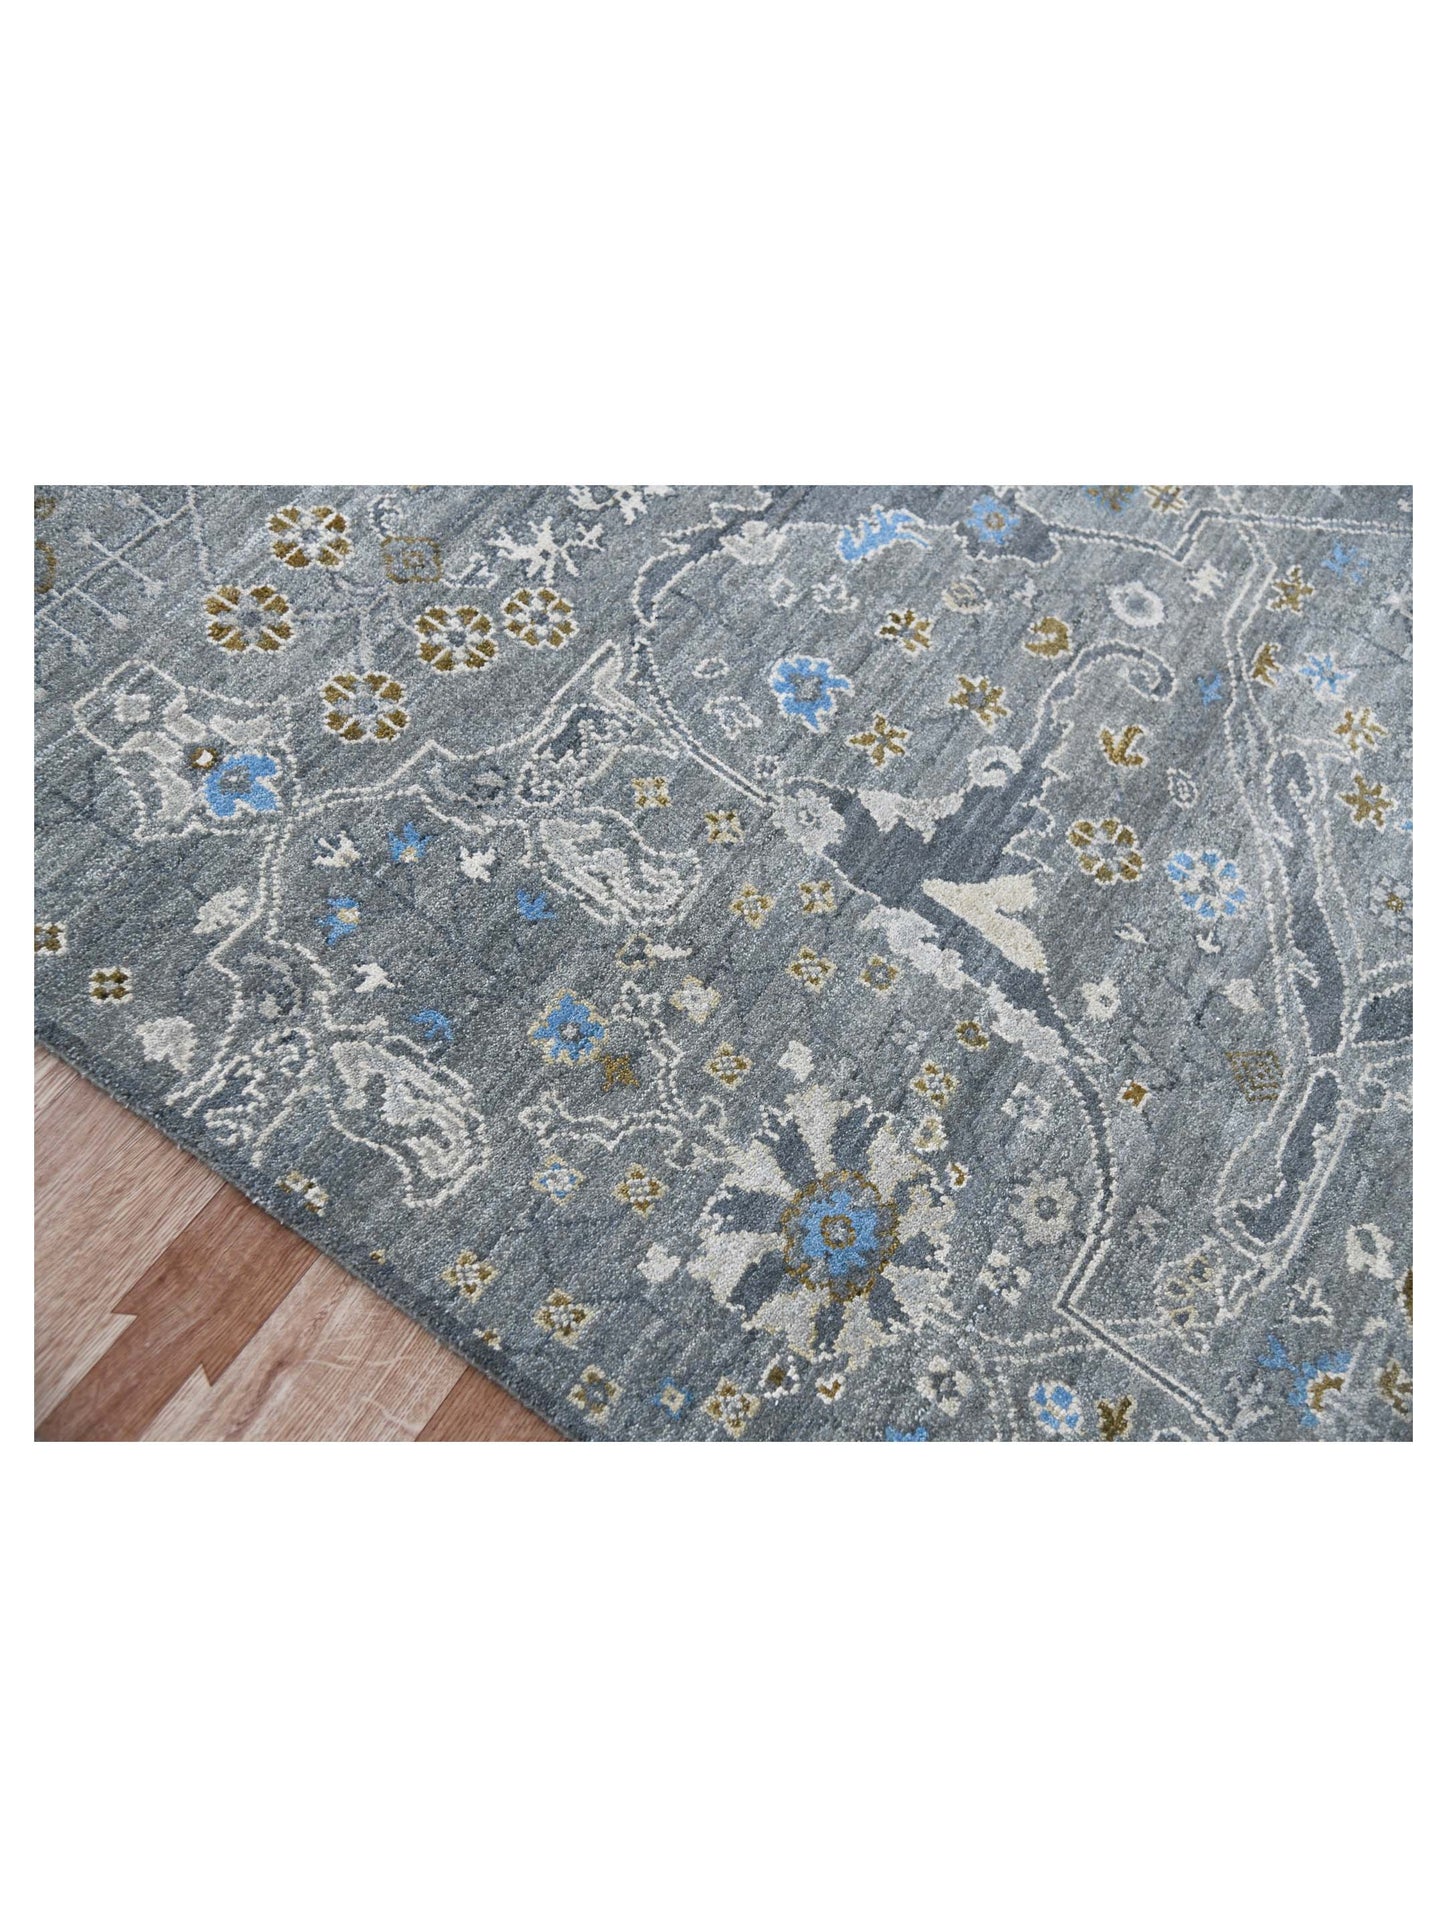 Limited Bailee BNS-500 SANTAS GRAY  Traditional Knotted Rug